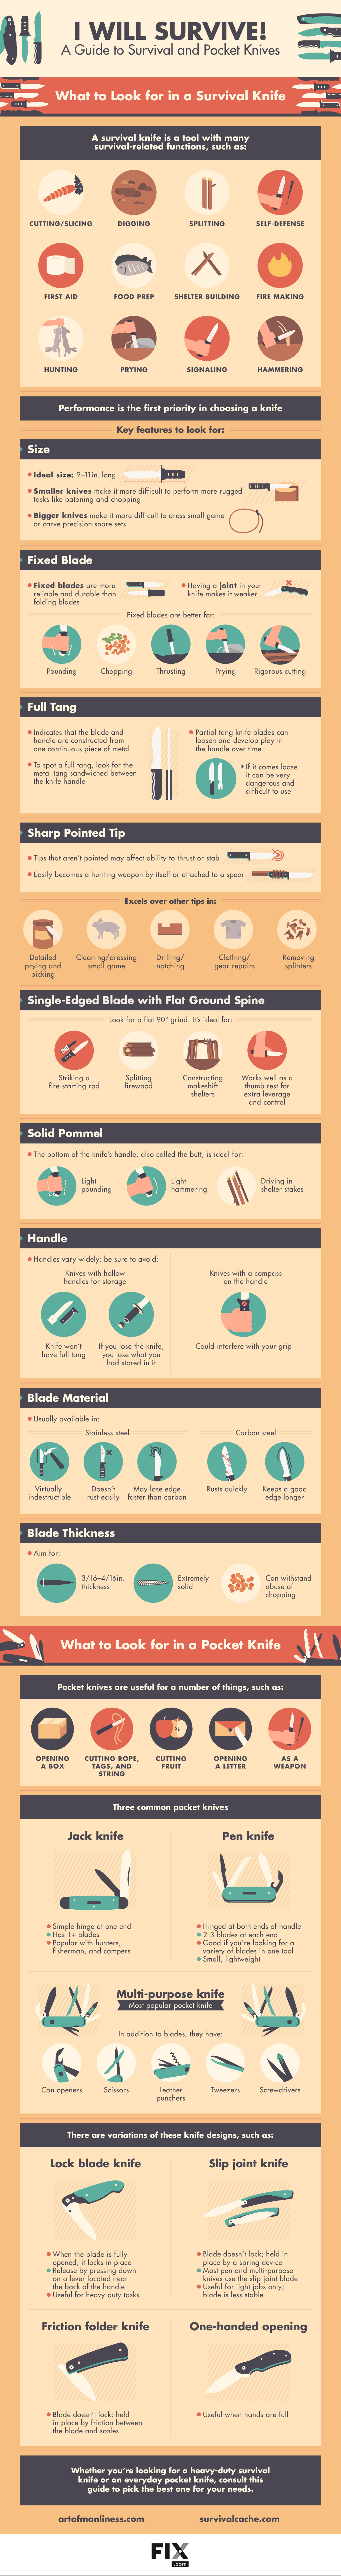 I Will Survive! A Guide to Survival and Pocket Knives infographic